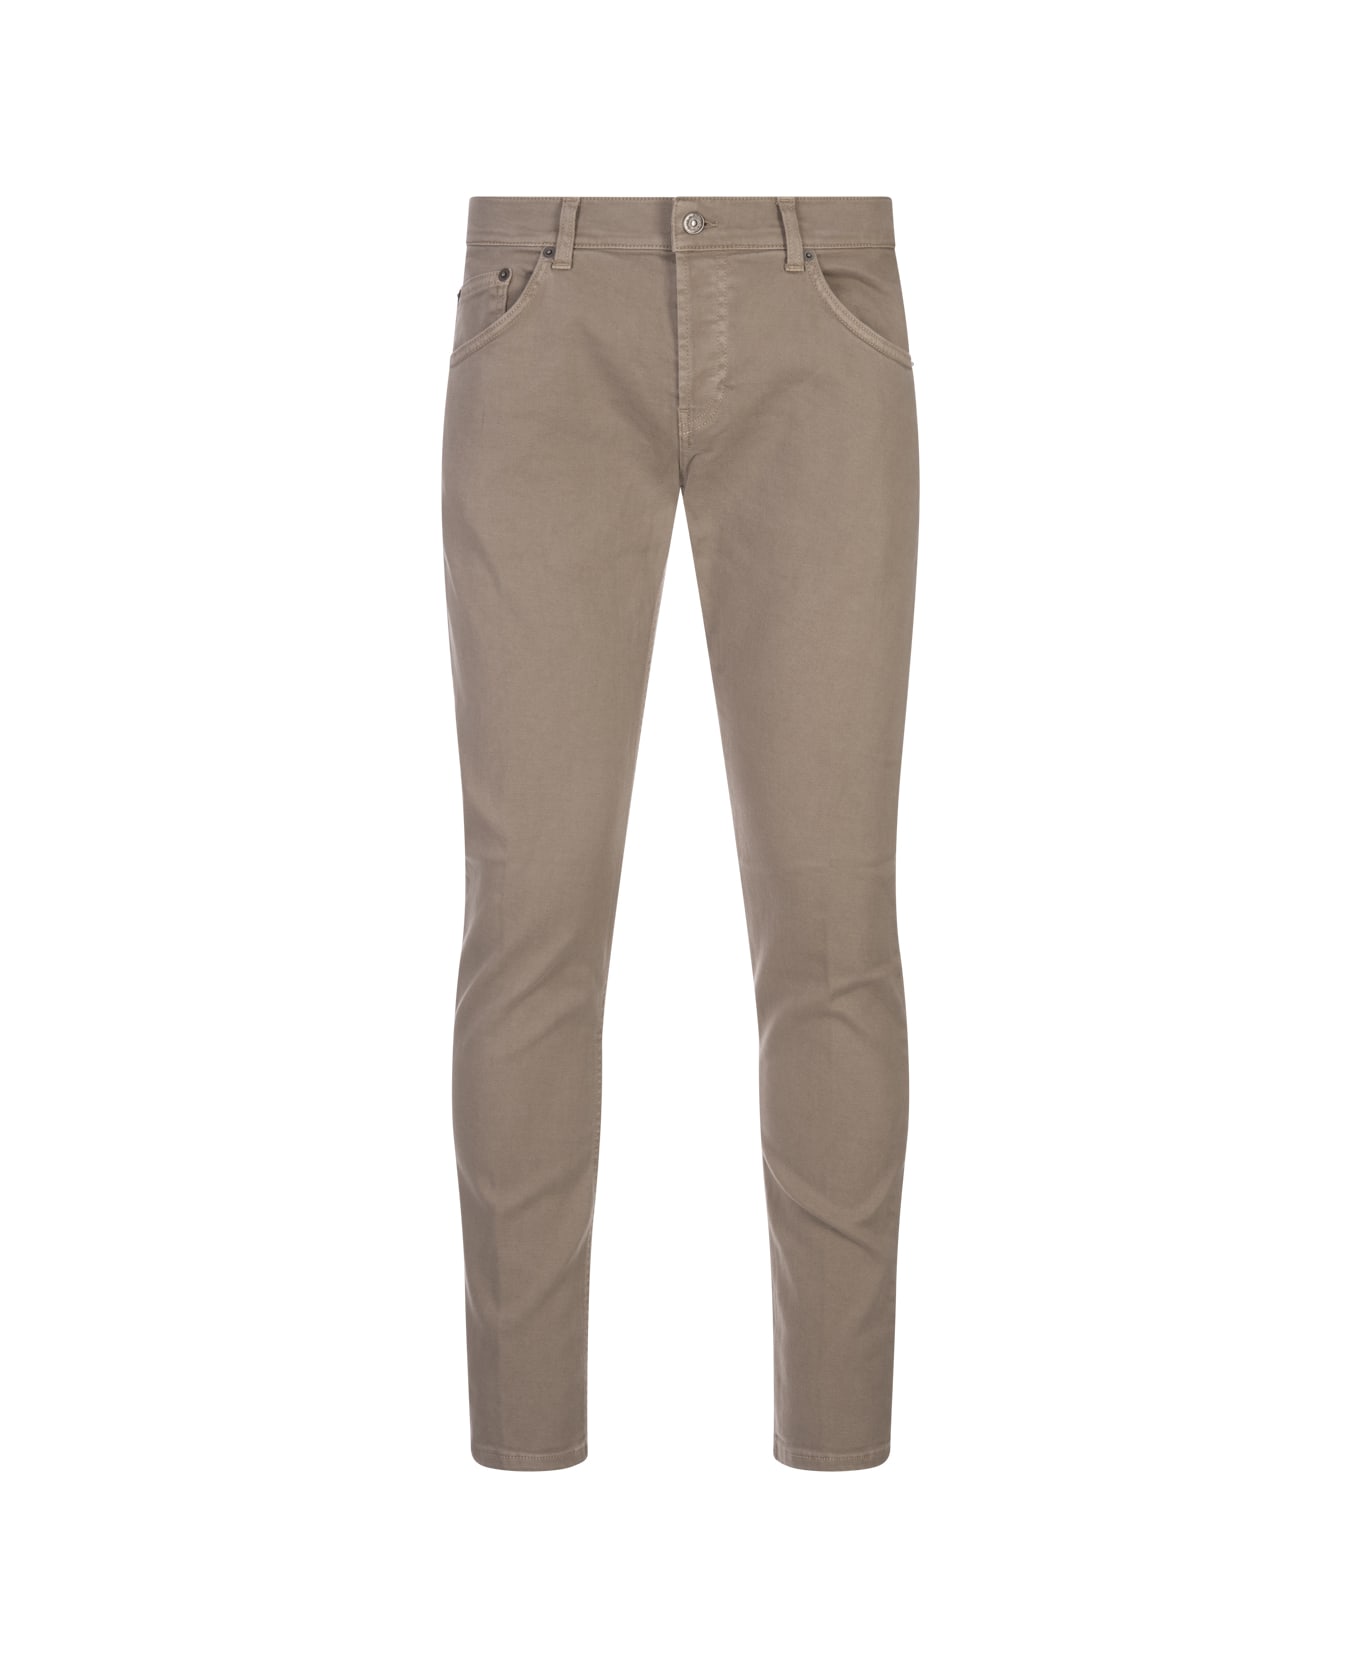 Dondup Mius Slim Fit Jeans In Sand Bull Stretch - Brown デニム